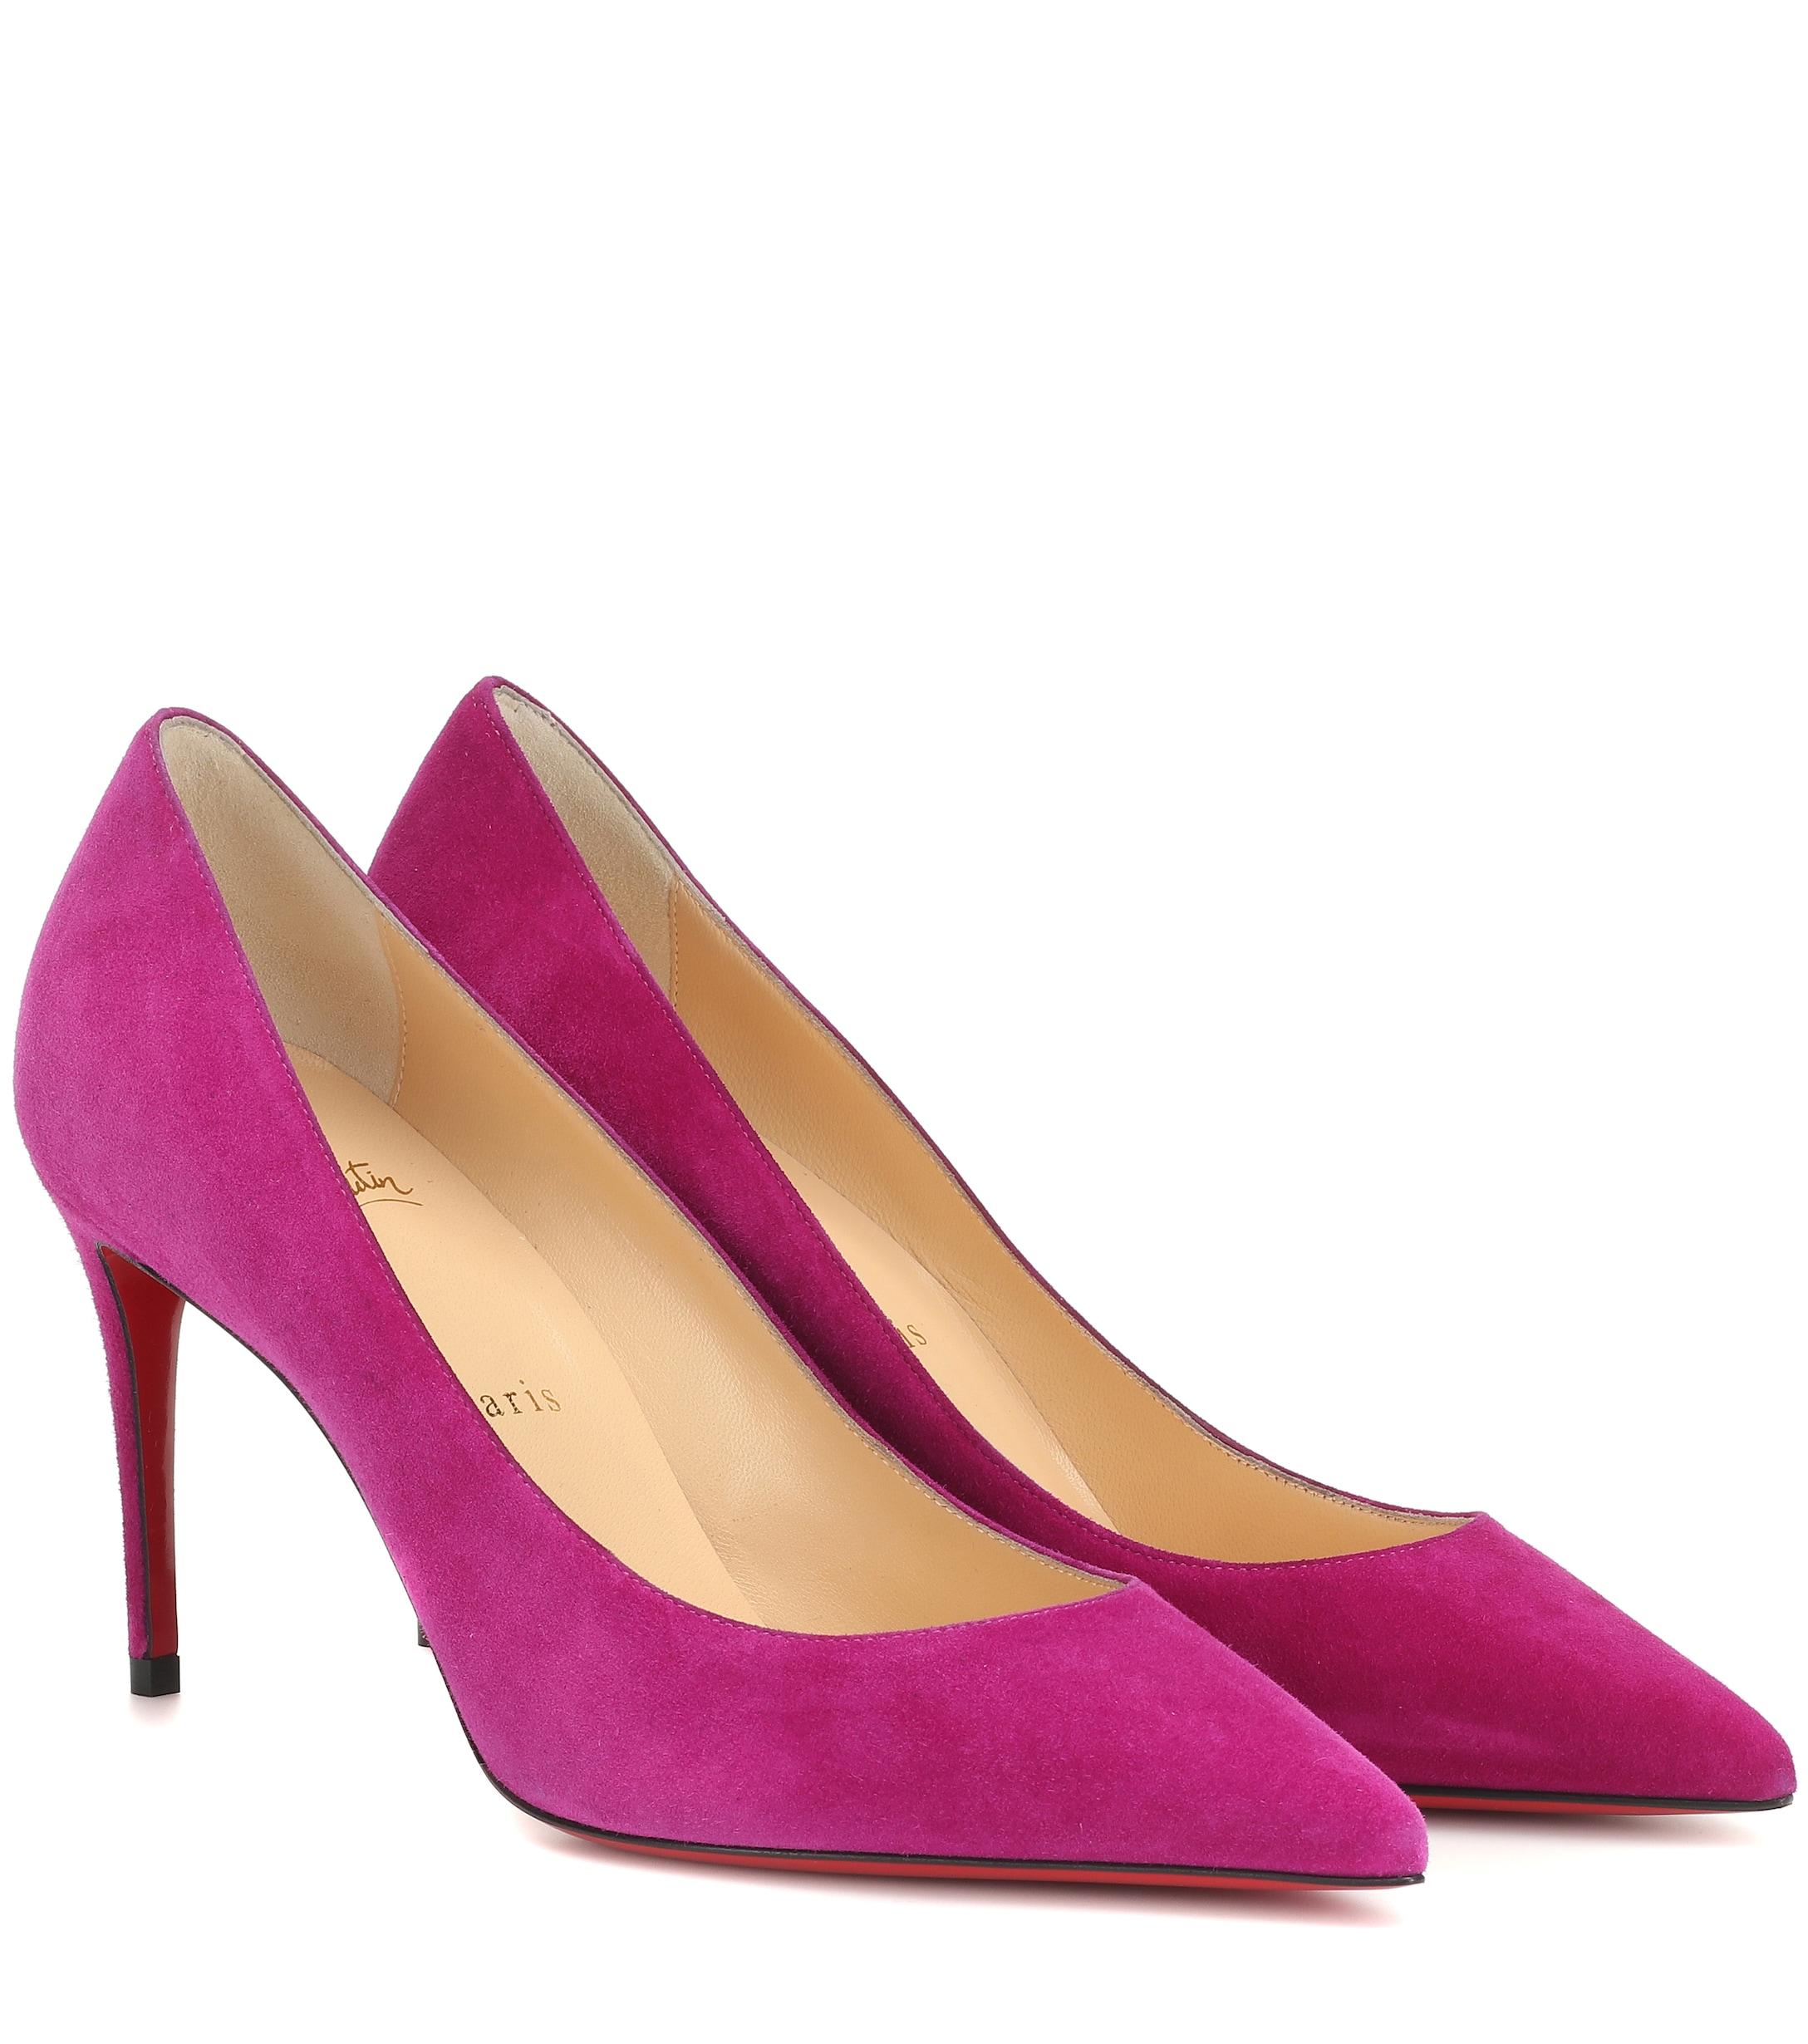 Christian Louboutin Kate 85 Suede Pumps in Pink - Lyst